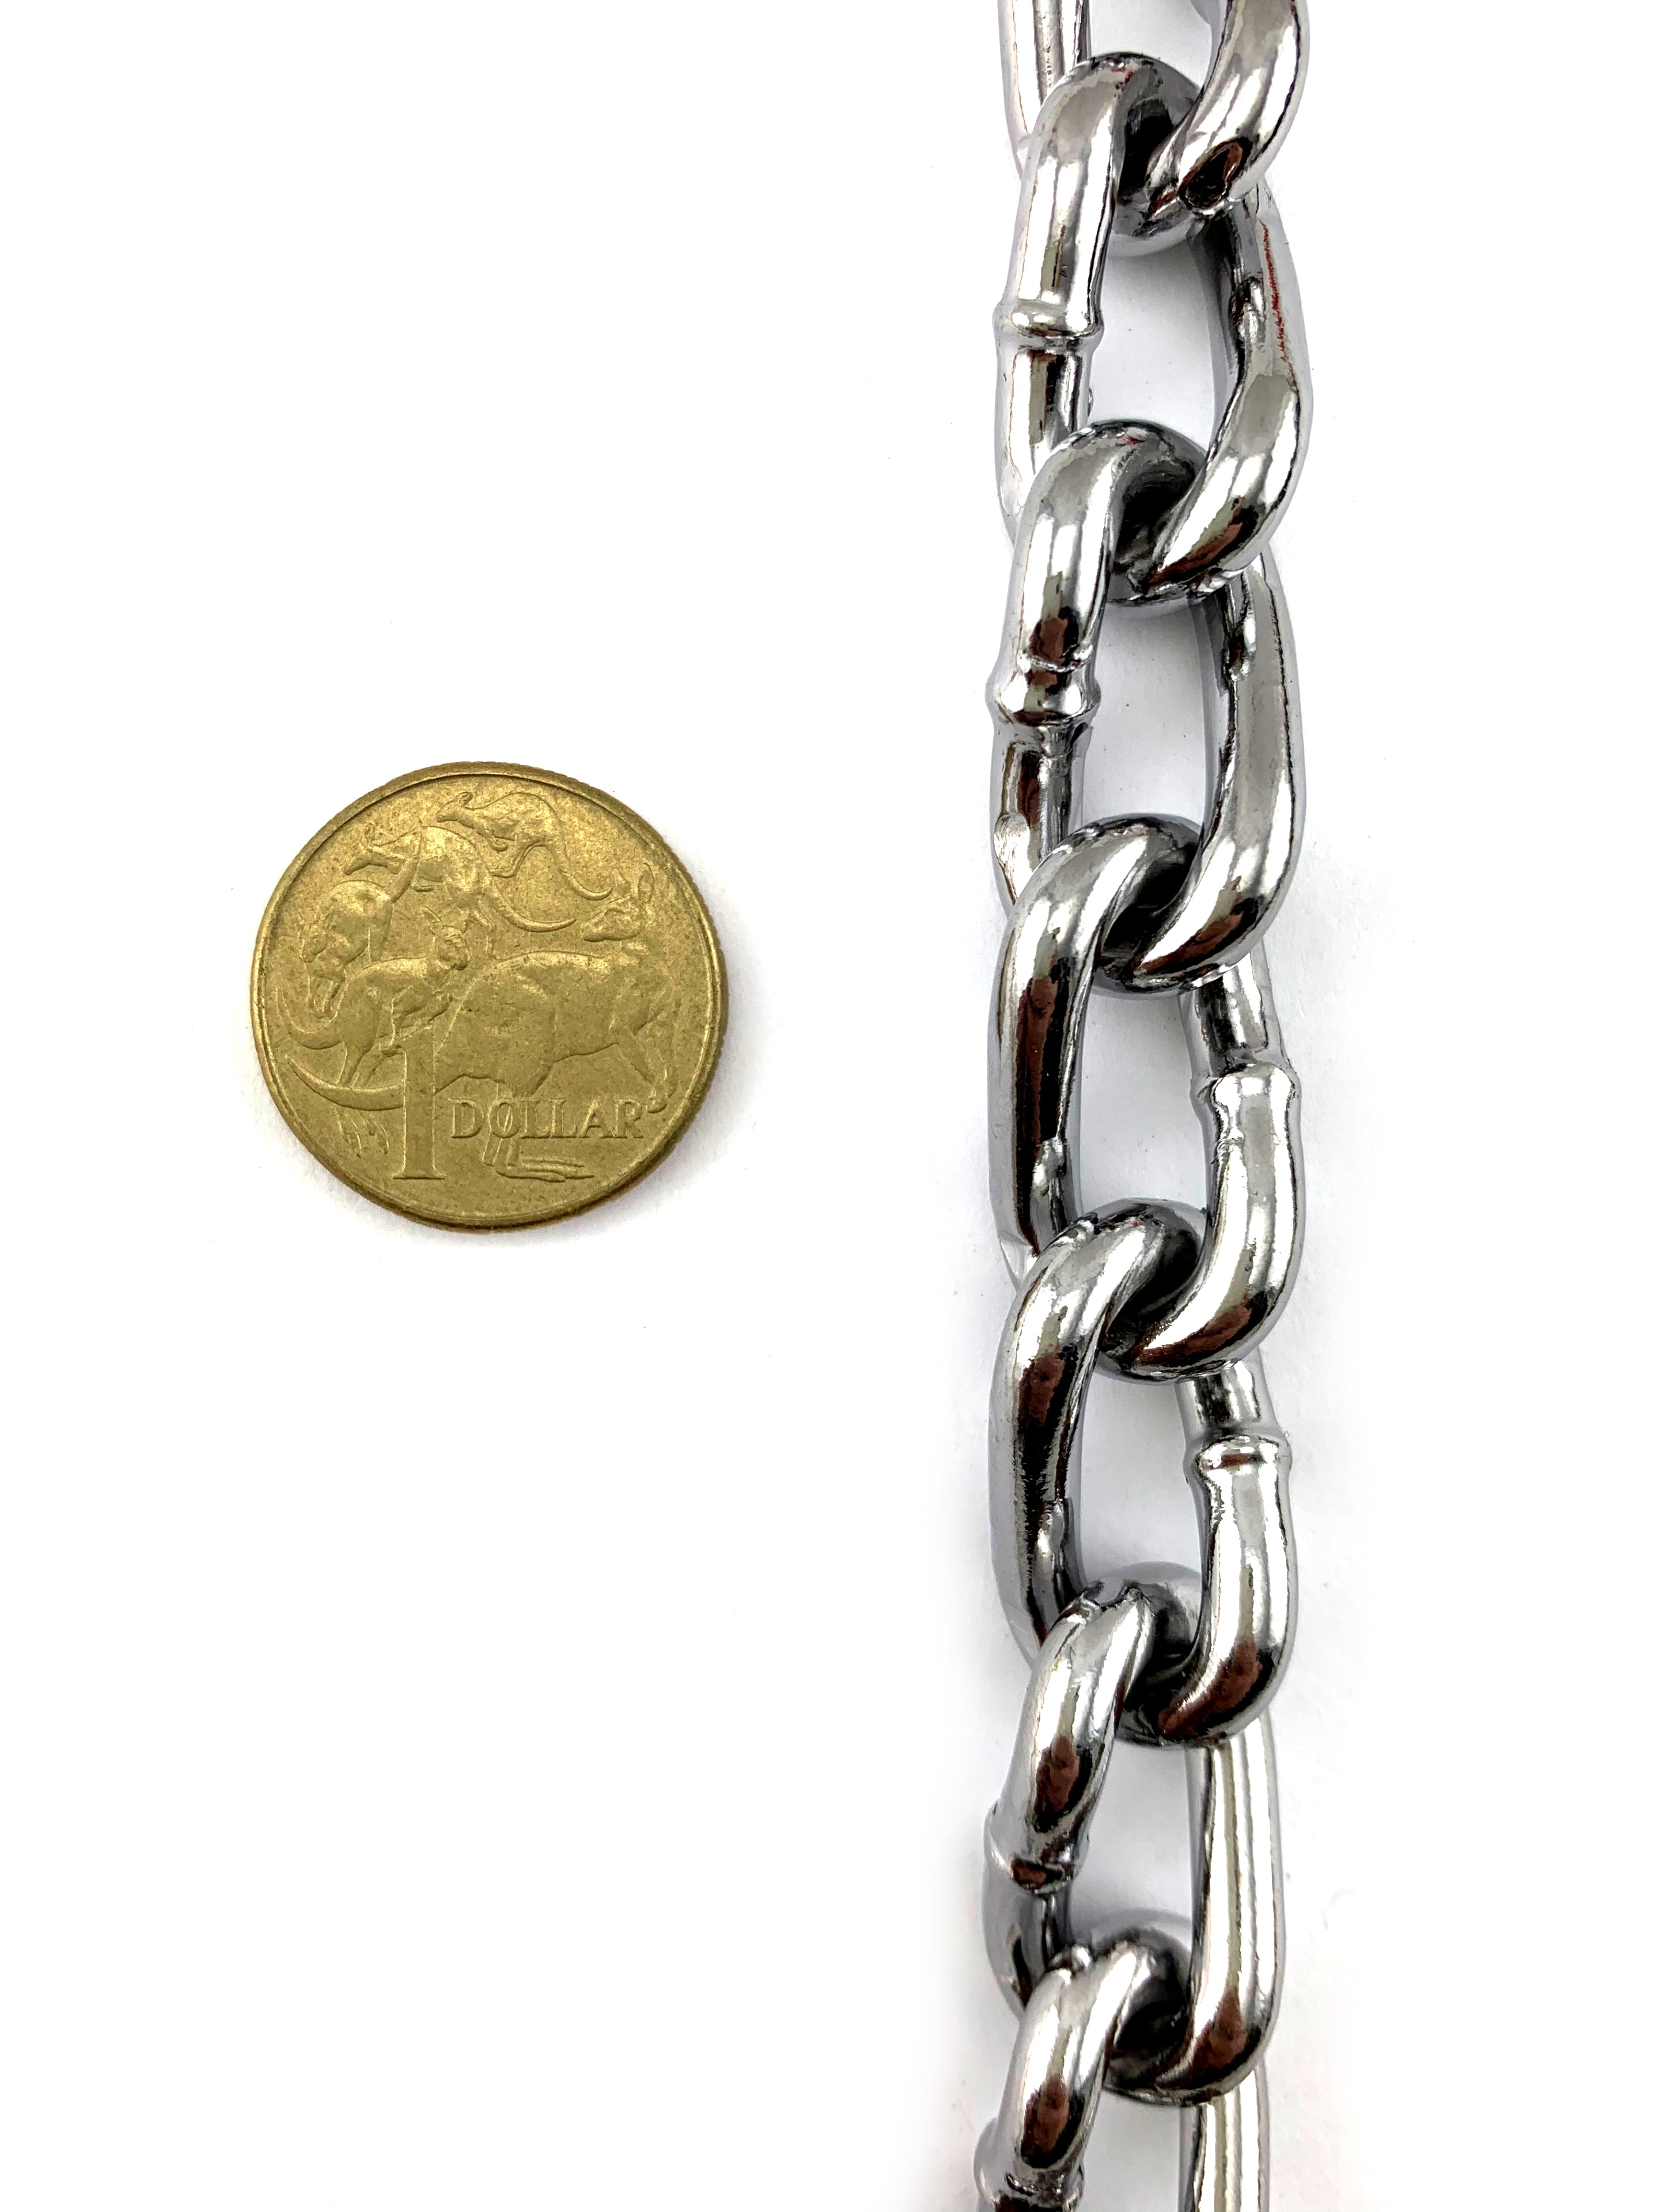 Chrome Curb Chain, size 4.8mm on a 30 metre reel. Melbourne and Australia wide delivery.